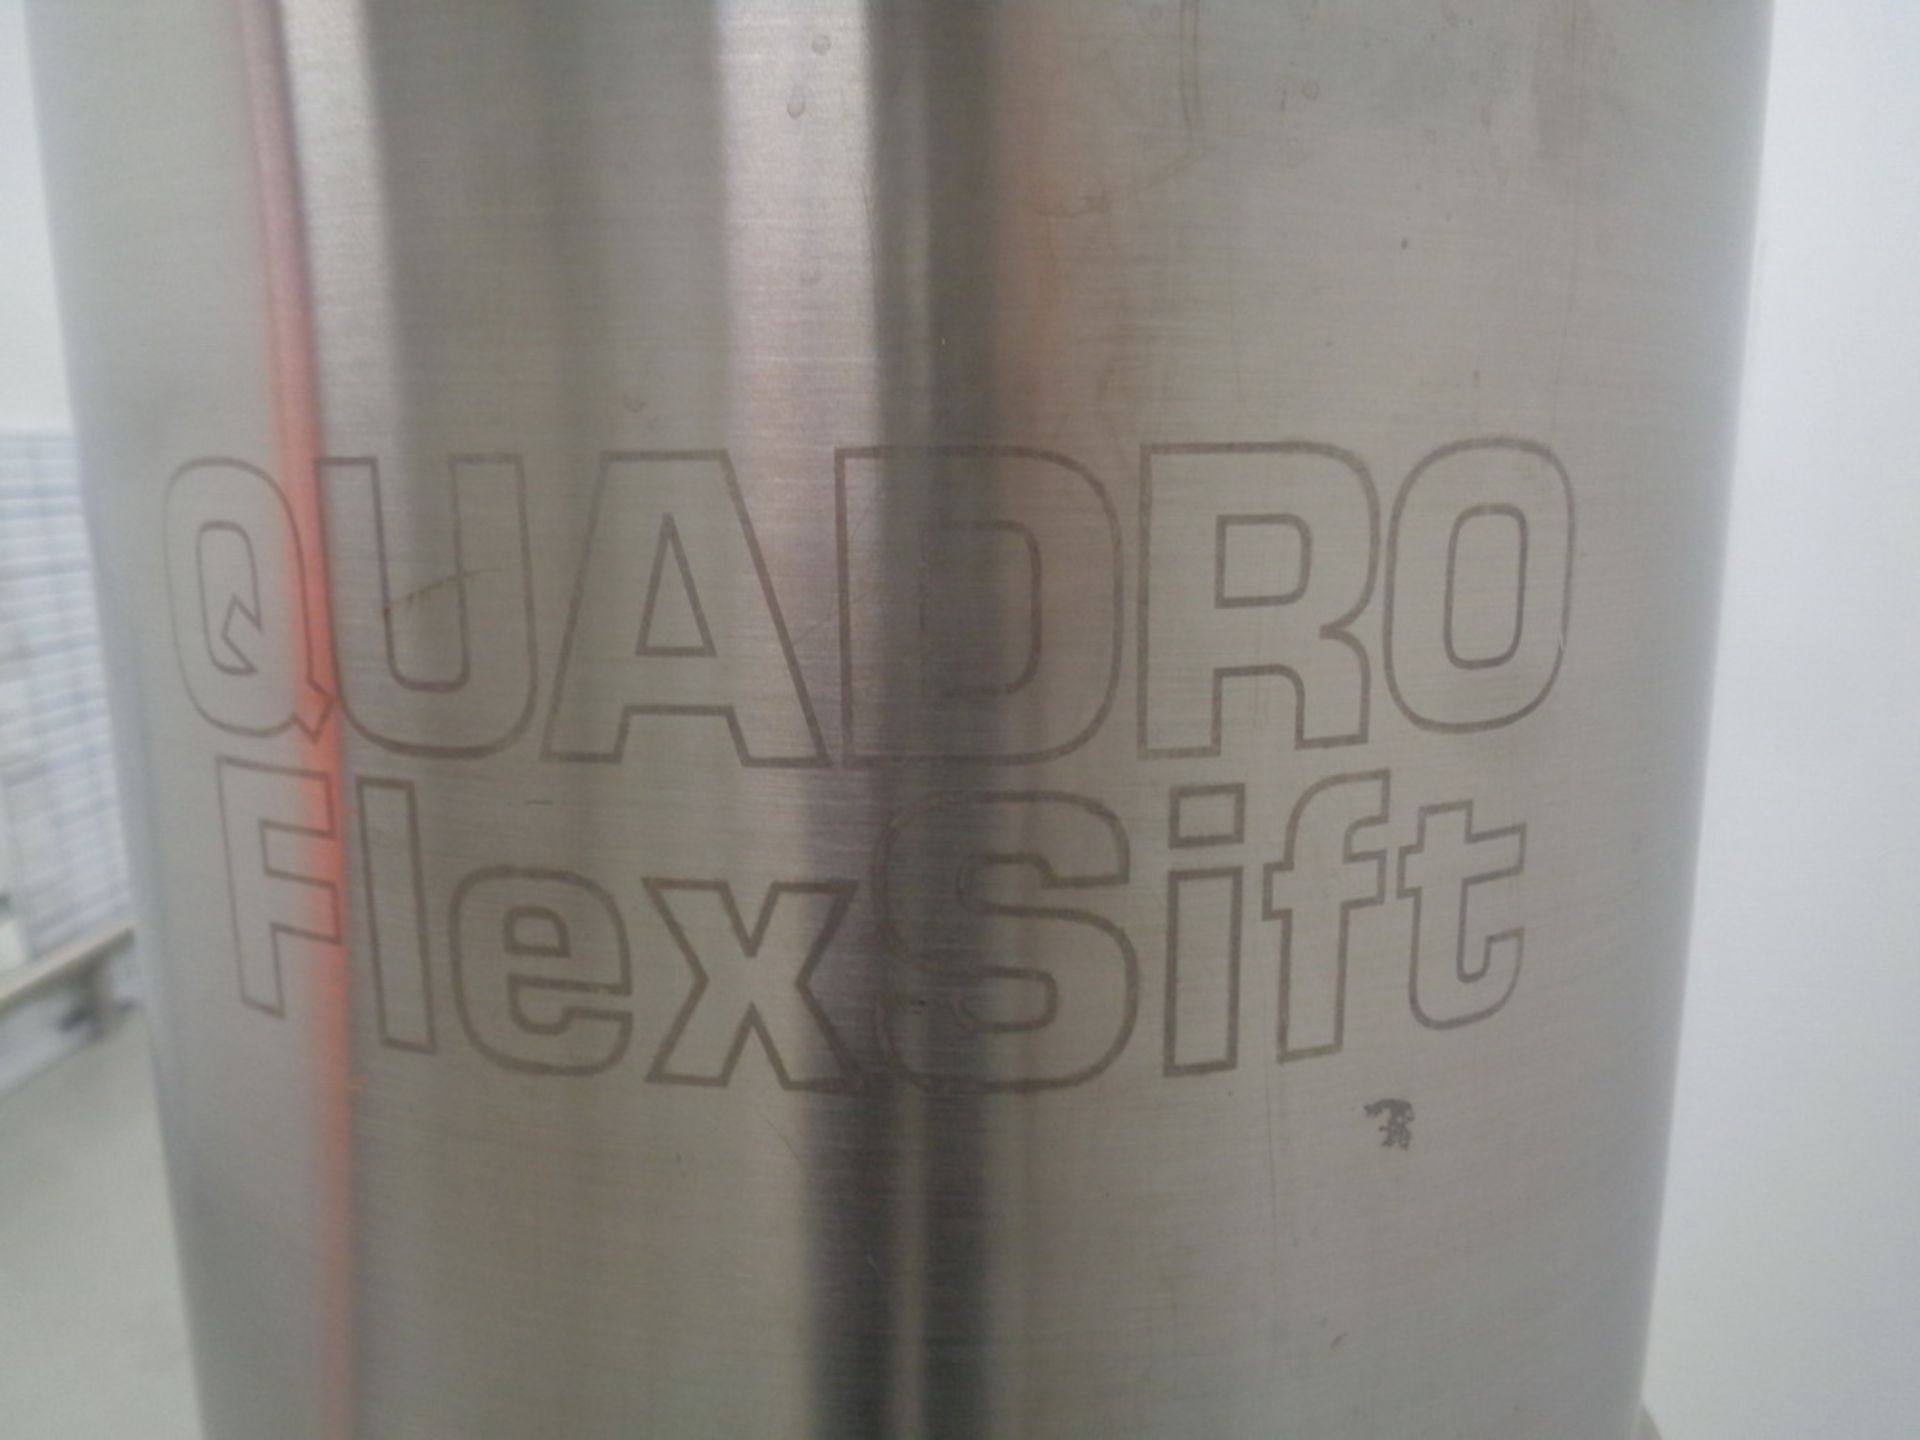 Quadro Stainless Steel Portable Sifter, Model S20, S/N 0041R - Image 4 of 7